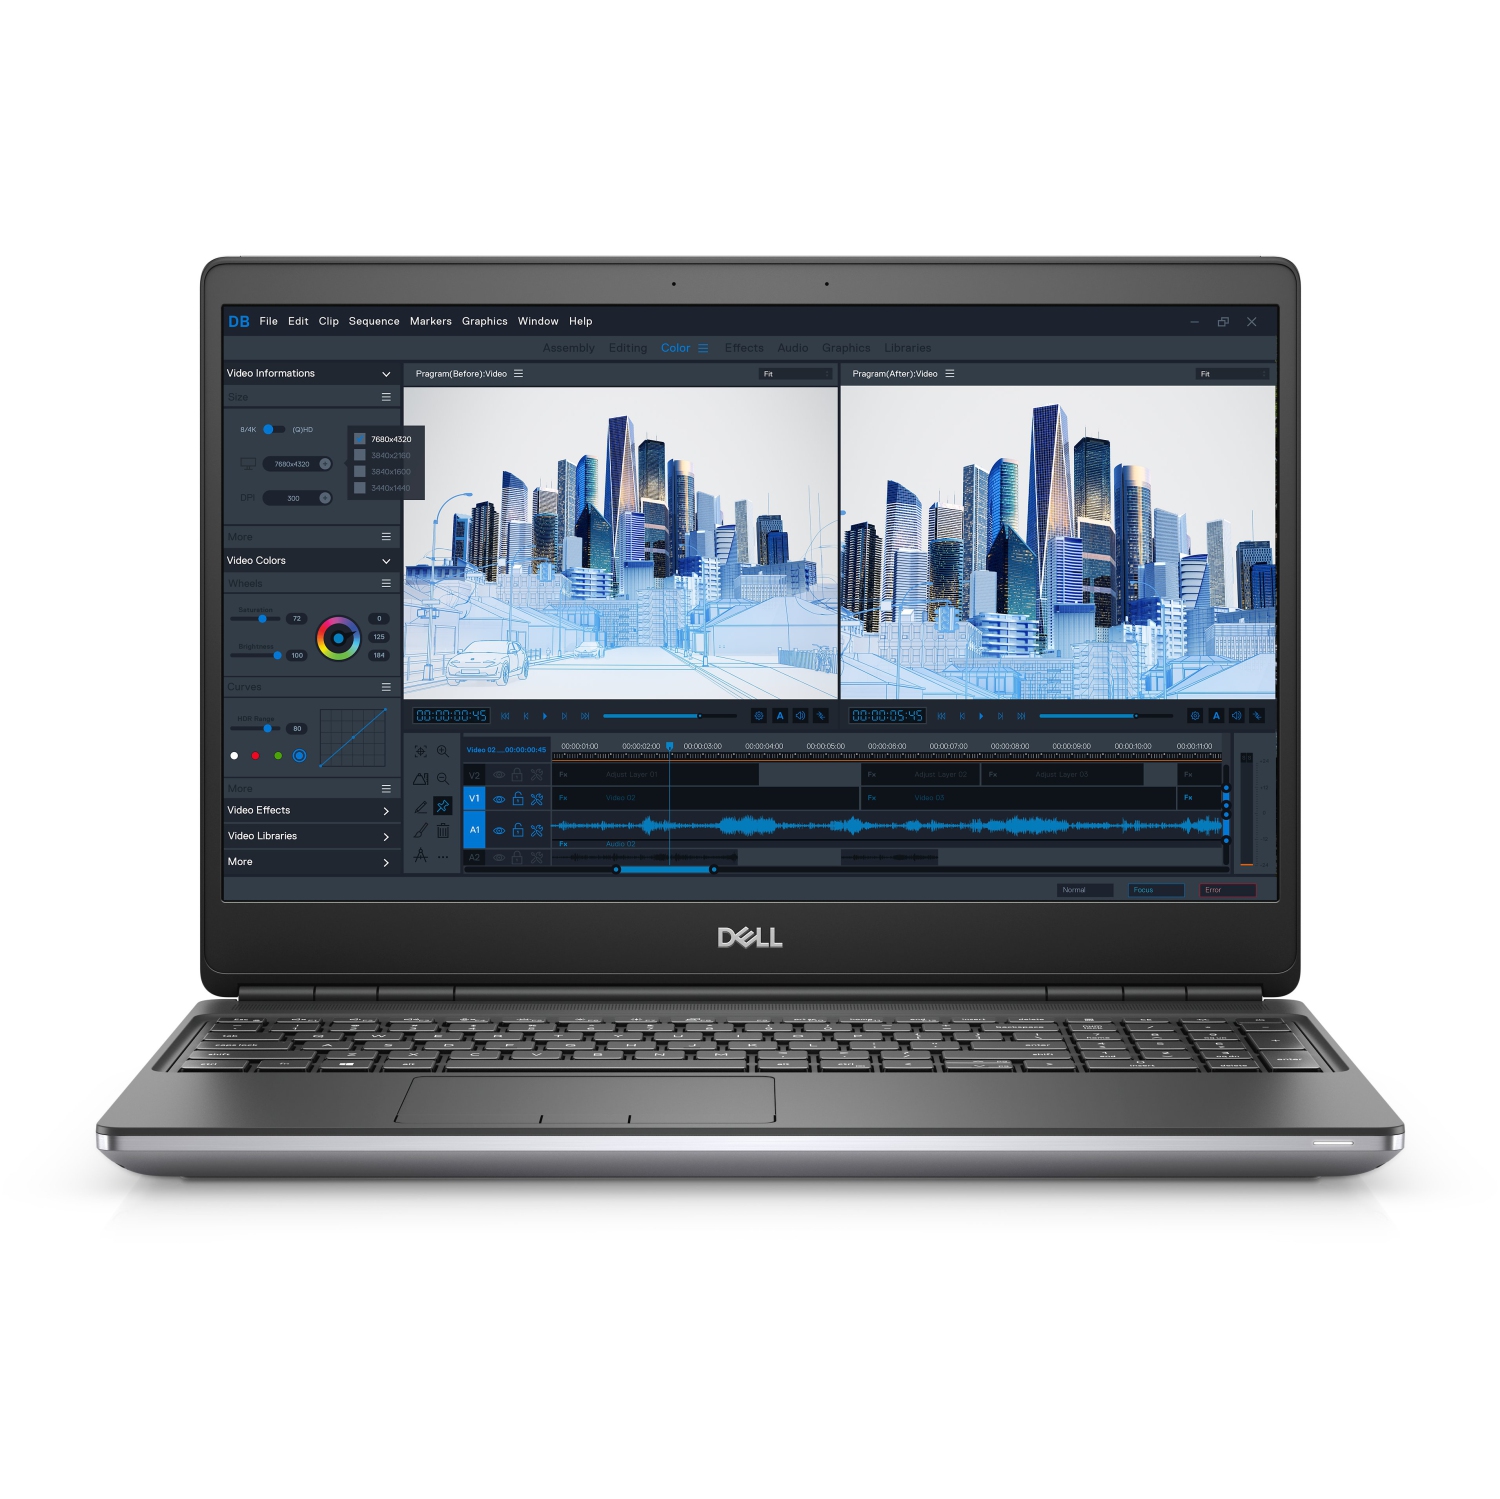 Refurbished (Excellent) - Dell Precision 7000 7560 Workstation Laptop (2021), 15.6" FHD, Core i7, 2TB SSD, 128GB RAM, RTX A4000, 4.8 GHz, 11th Gen CPU Certified